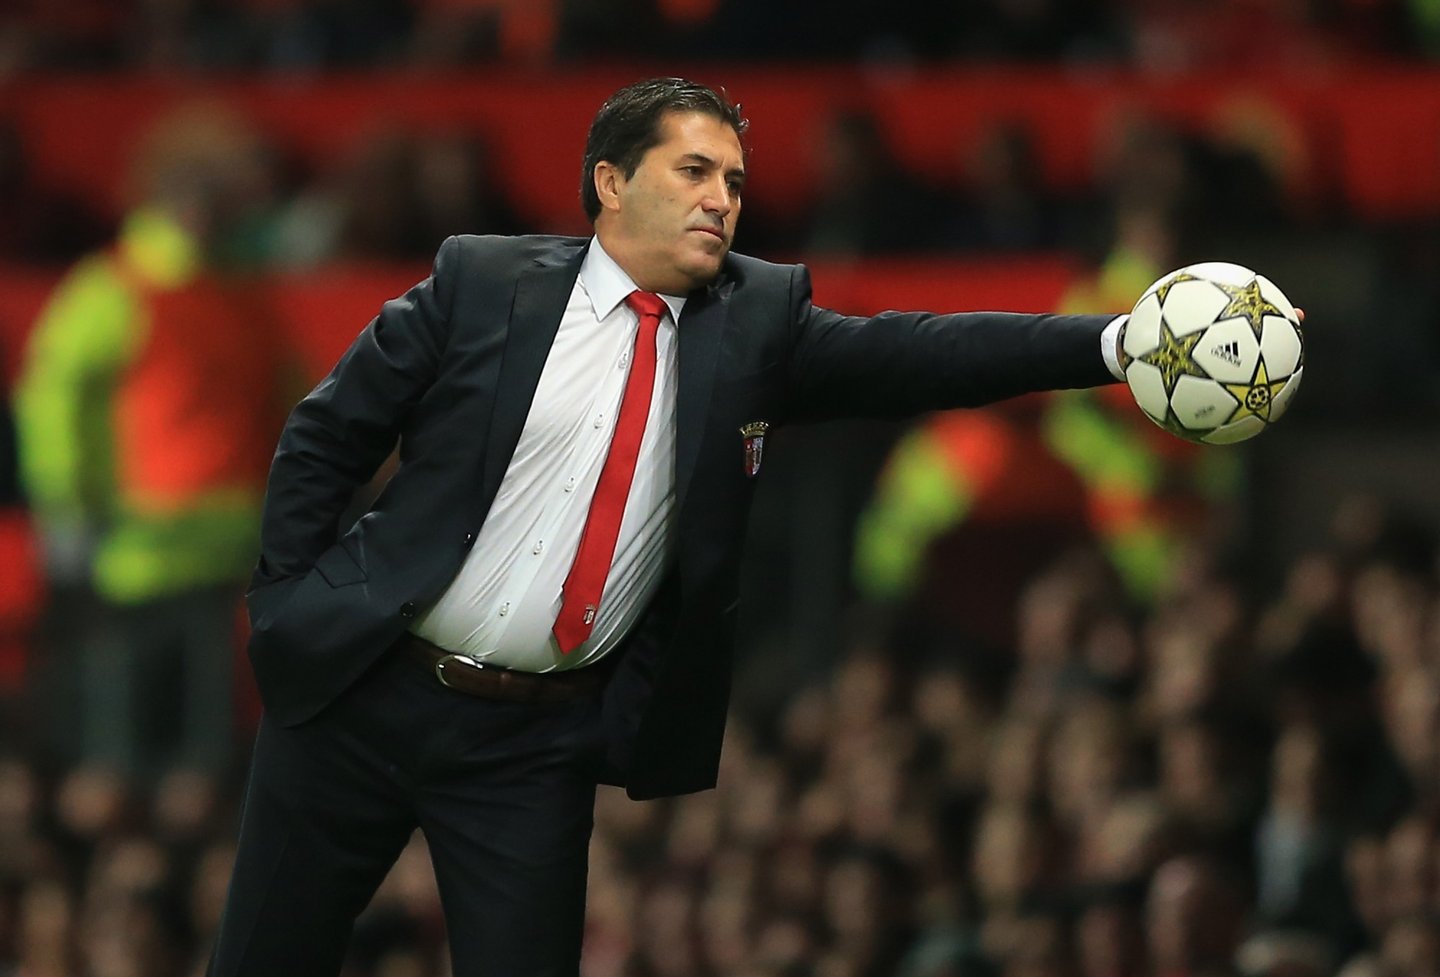 MANCHESTER, ENGLAND - OCTOBER 23: Head Coach of SC Braga Jose Peseiro stops the ball during the UEFA Champions League Group H match between Manchester United and SC Braga at Old Trafford on October 23, 2012 in Manchester, England. (Photo by Richard Heathcote/Getty Images)